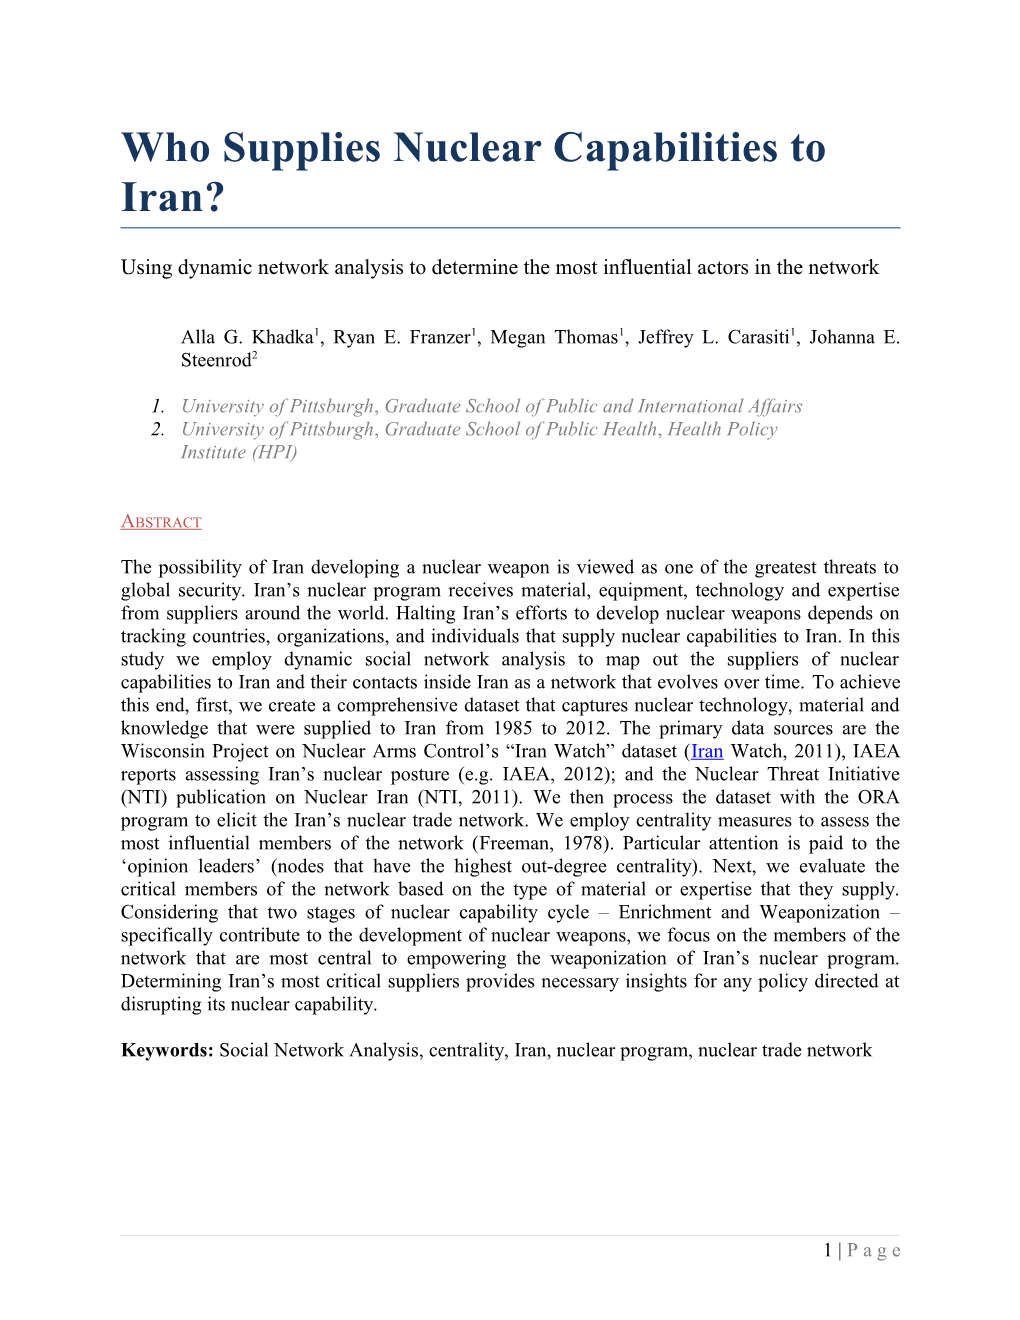 Who Supplies Nuclear Capabilities to Iran?